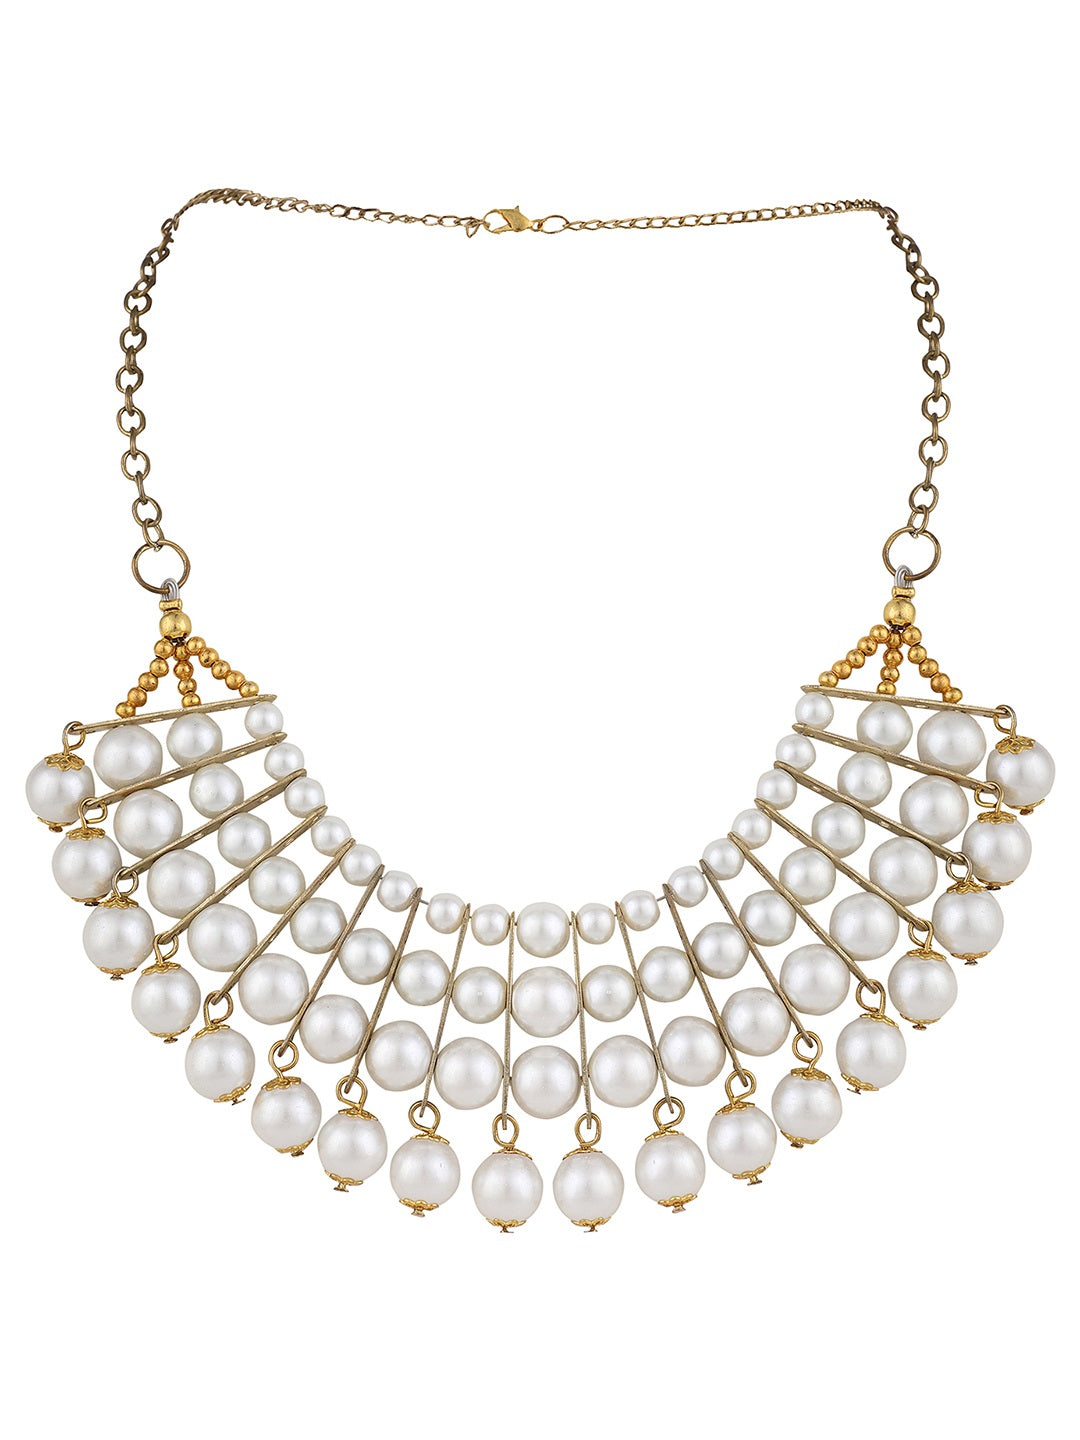 Women's Designer White Bead Stacked Gold-Plated Collar Necklace - Anikas Creation